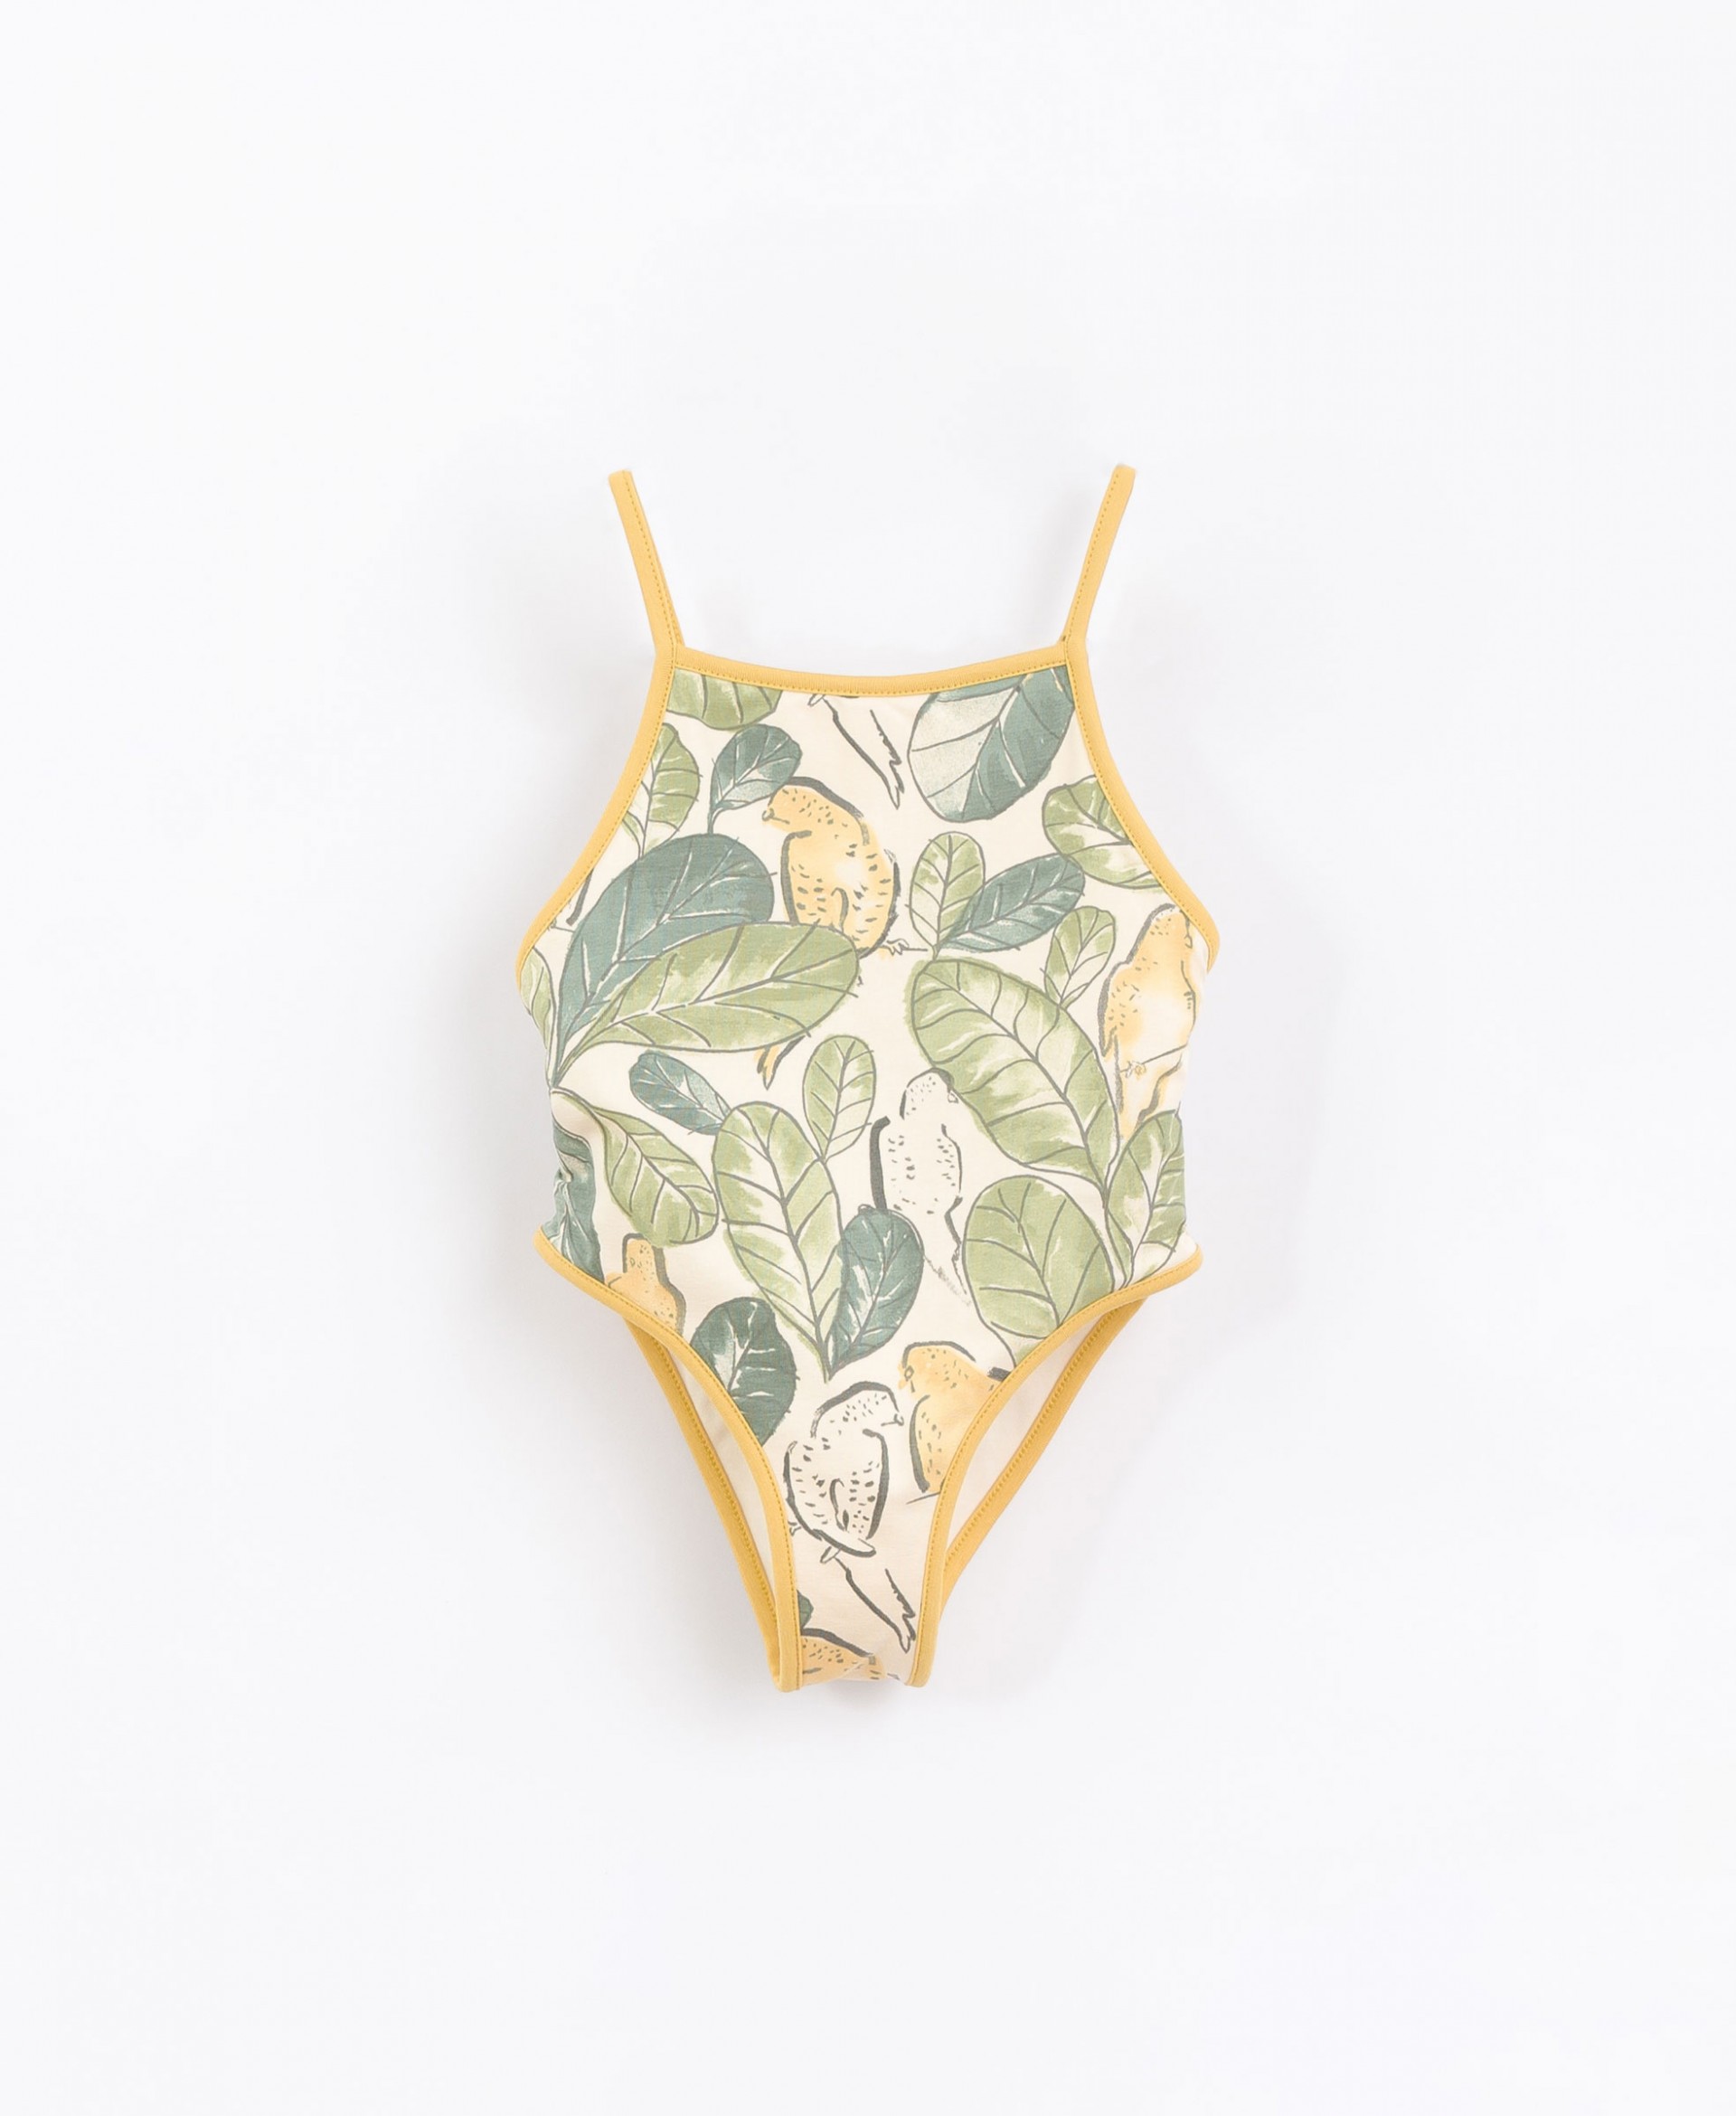 Bathing suit with crossed straps | Basketry